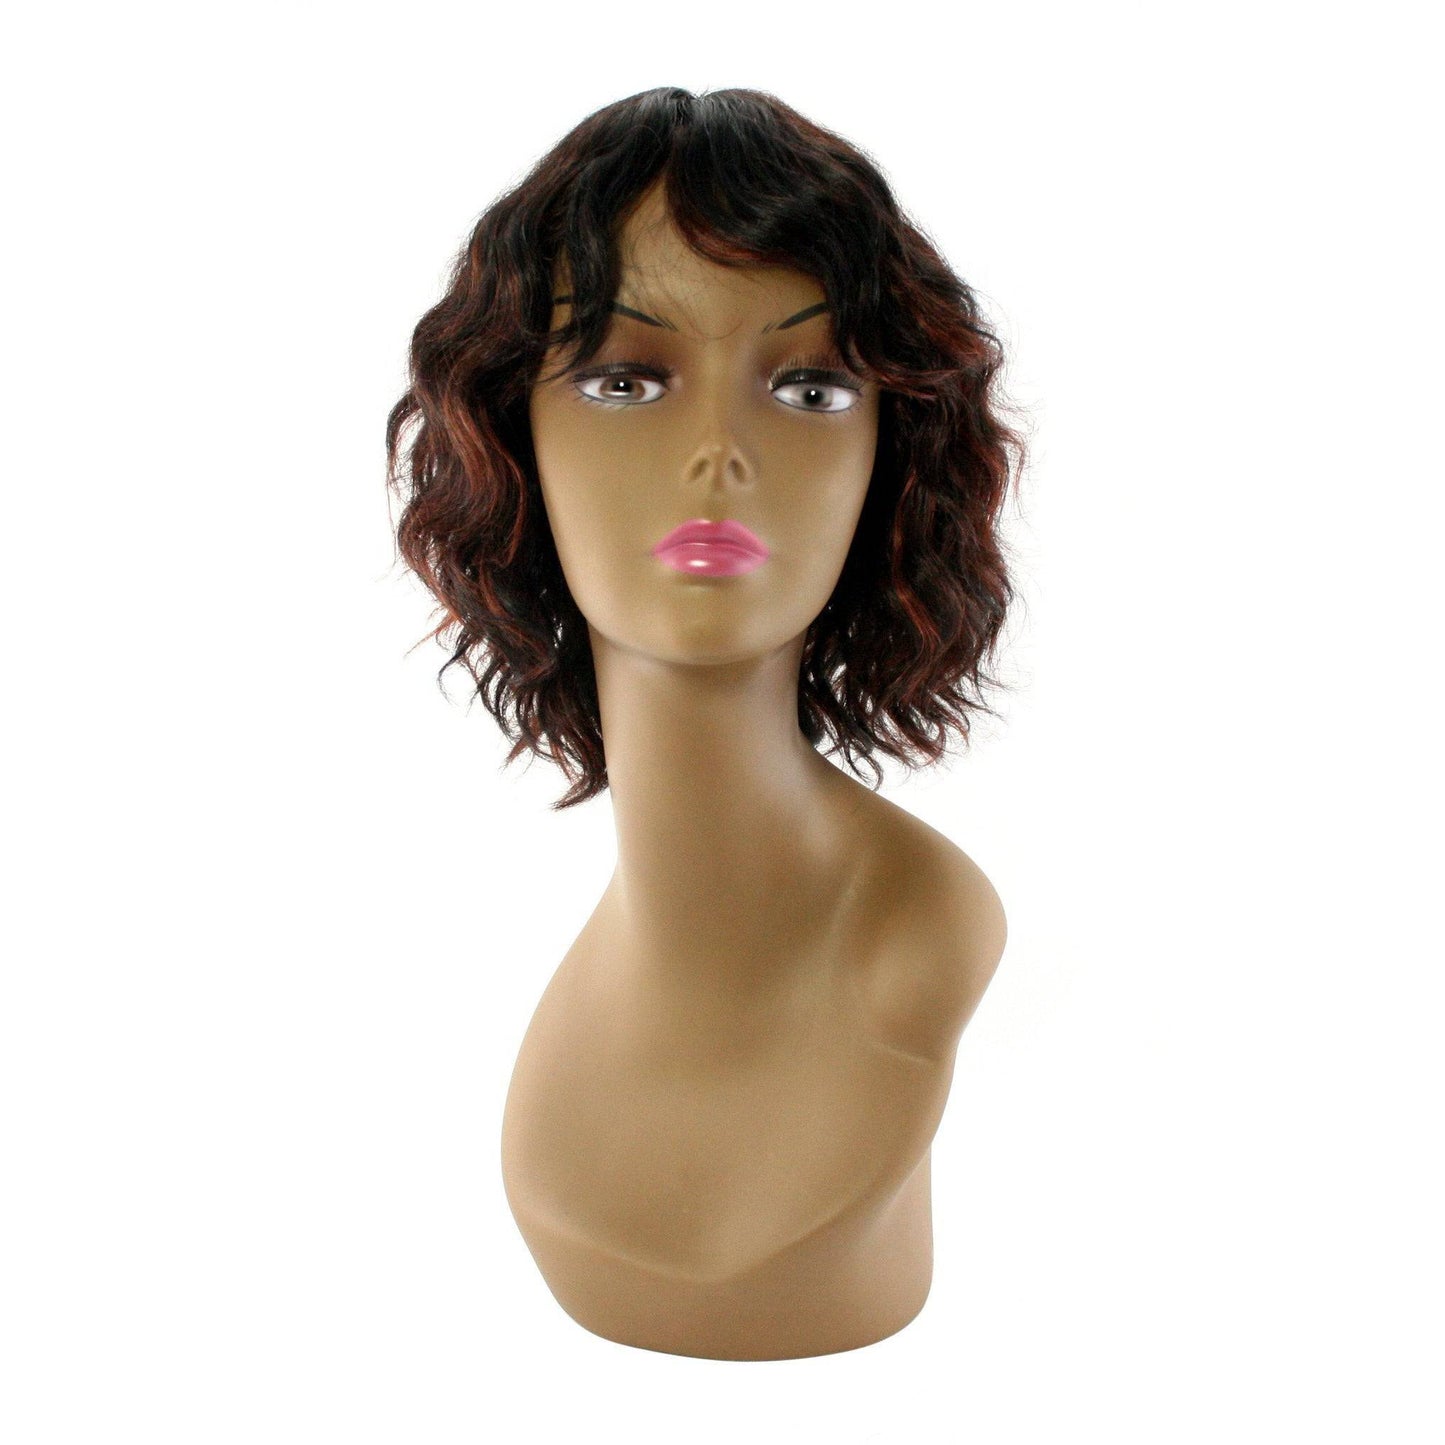 Unique's 100% Human Hair Full Wig / Style "Z" - VIP Extensions